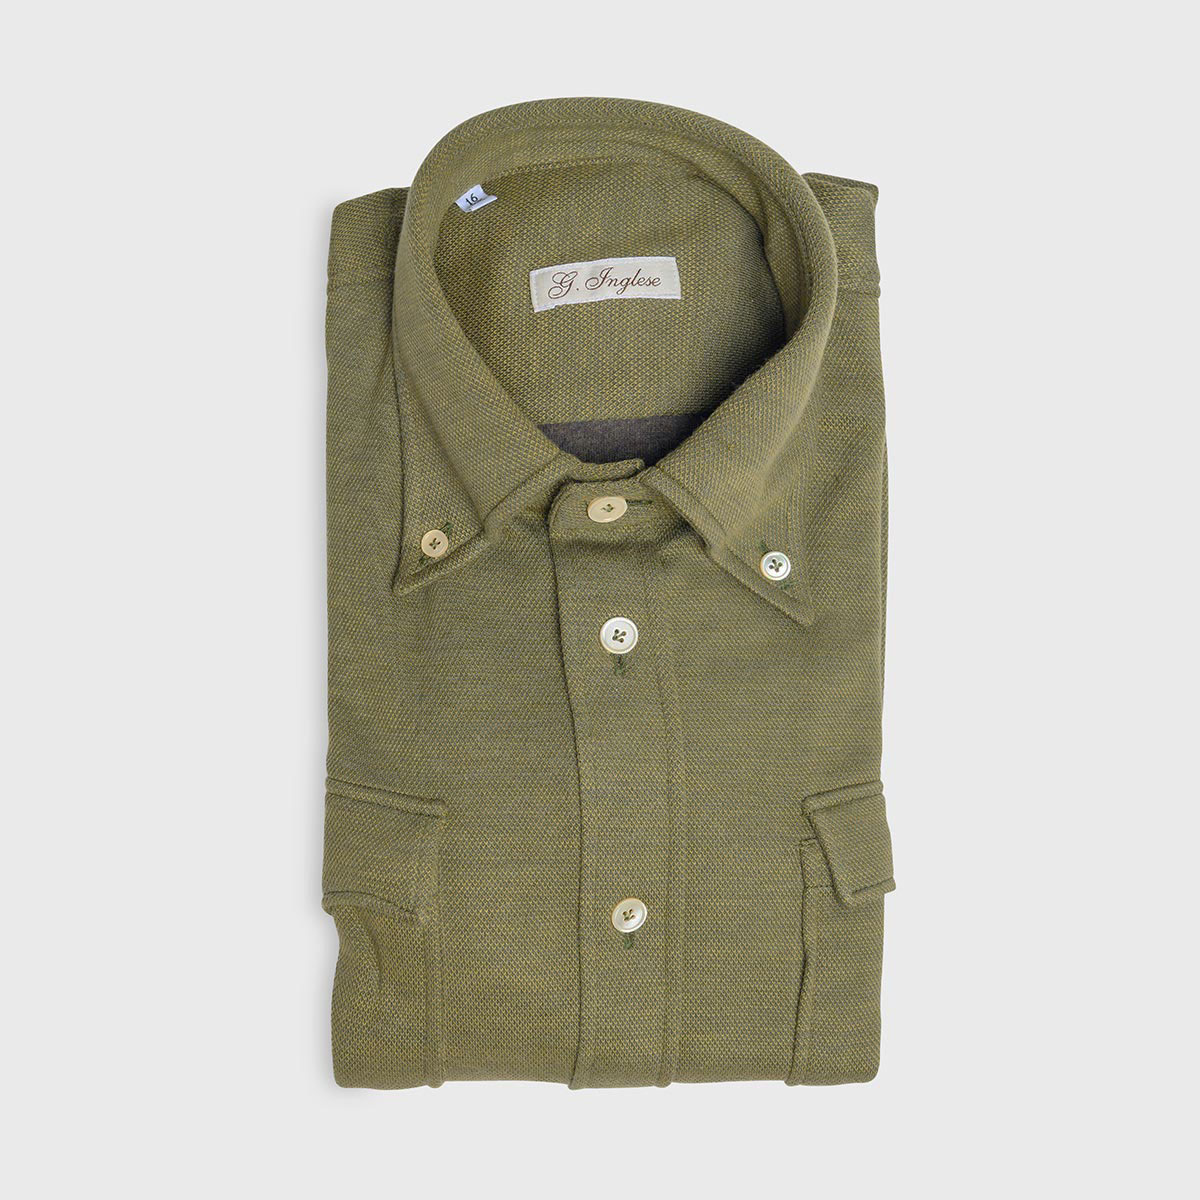 Green Cotton Piquet And Cashmere Botton-down Shirt G. Inglese on sale 2022